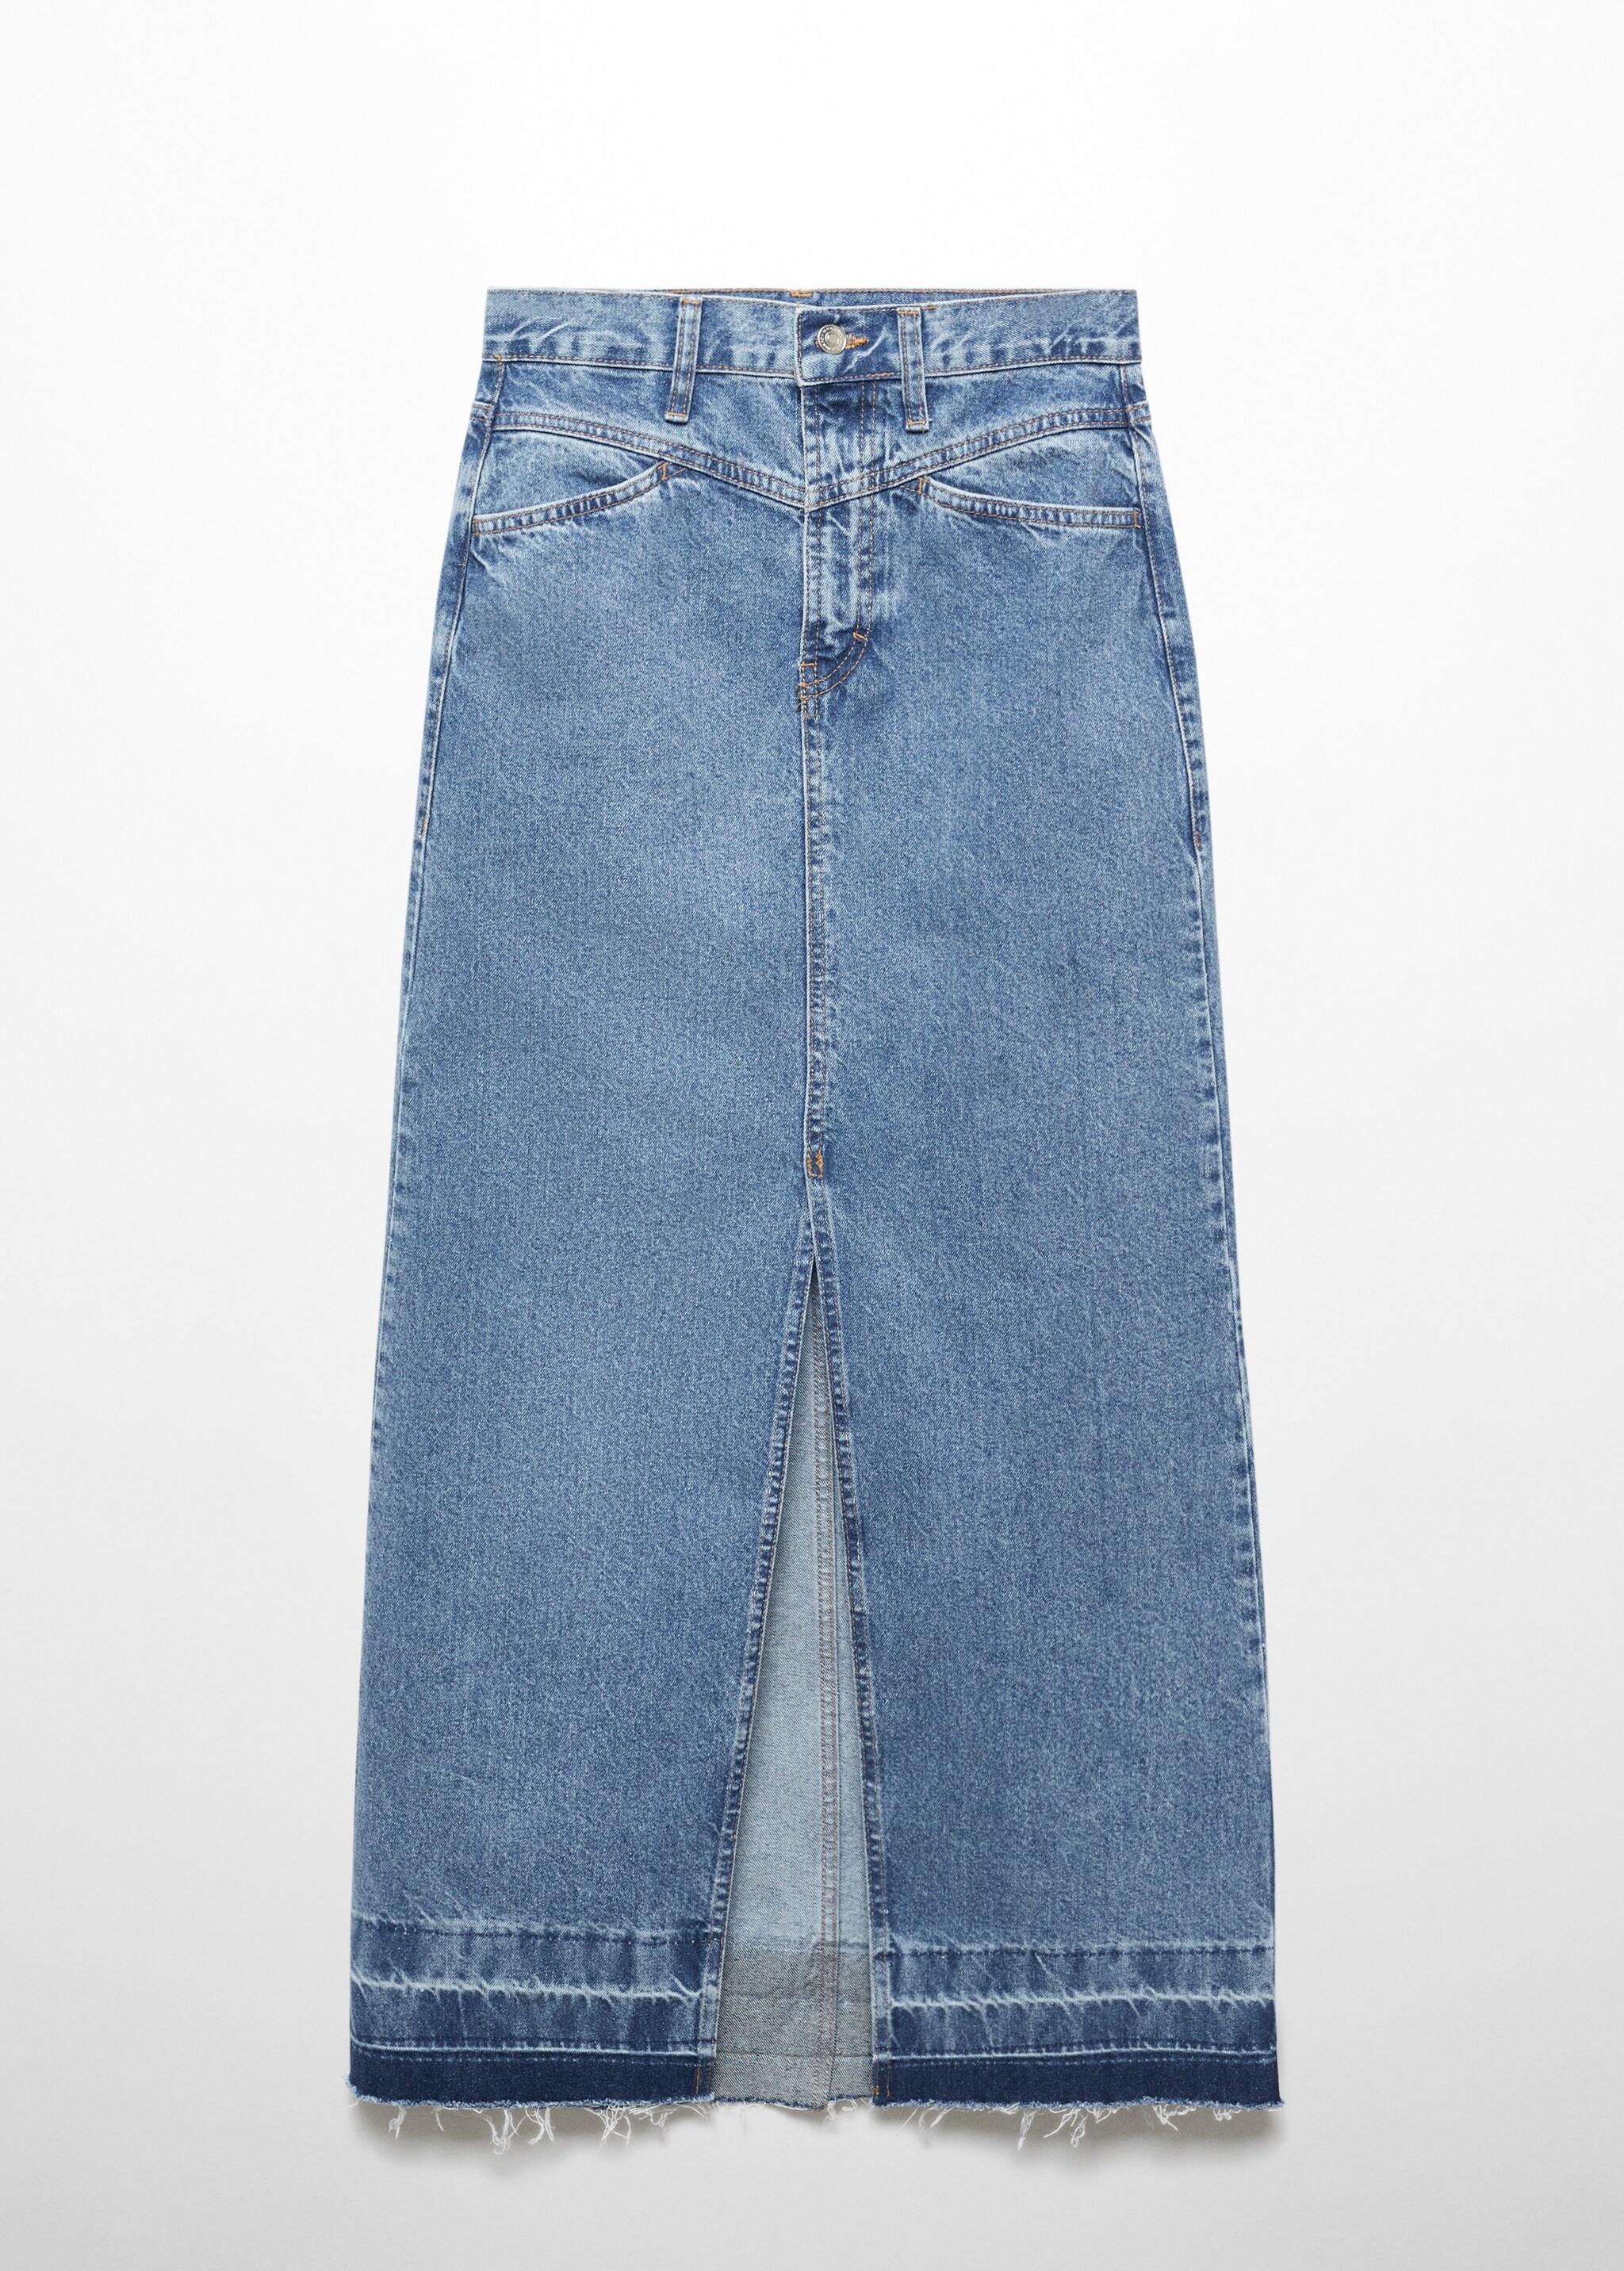 Long denim skirt - Article without model